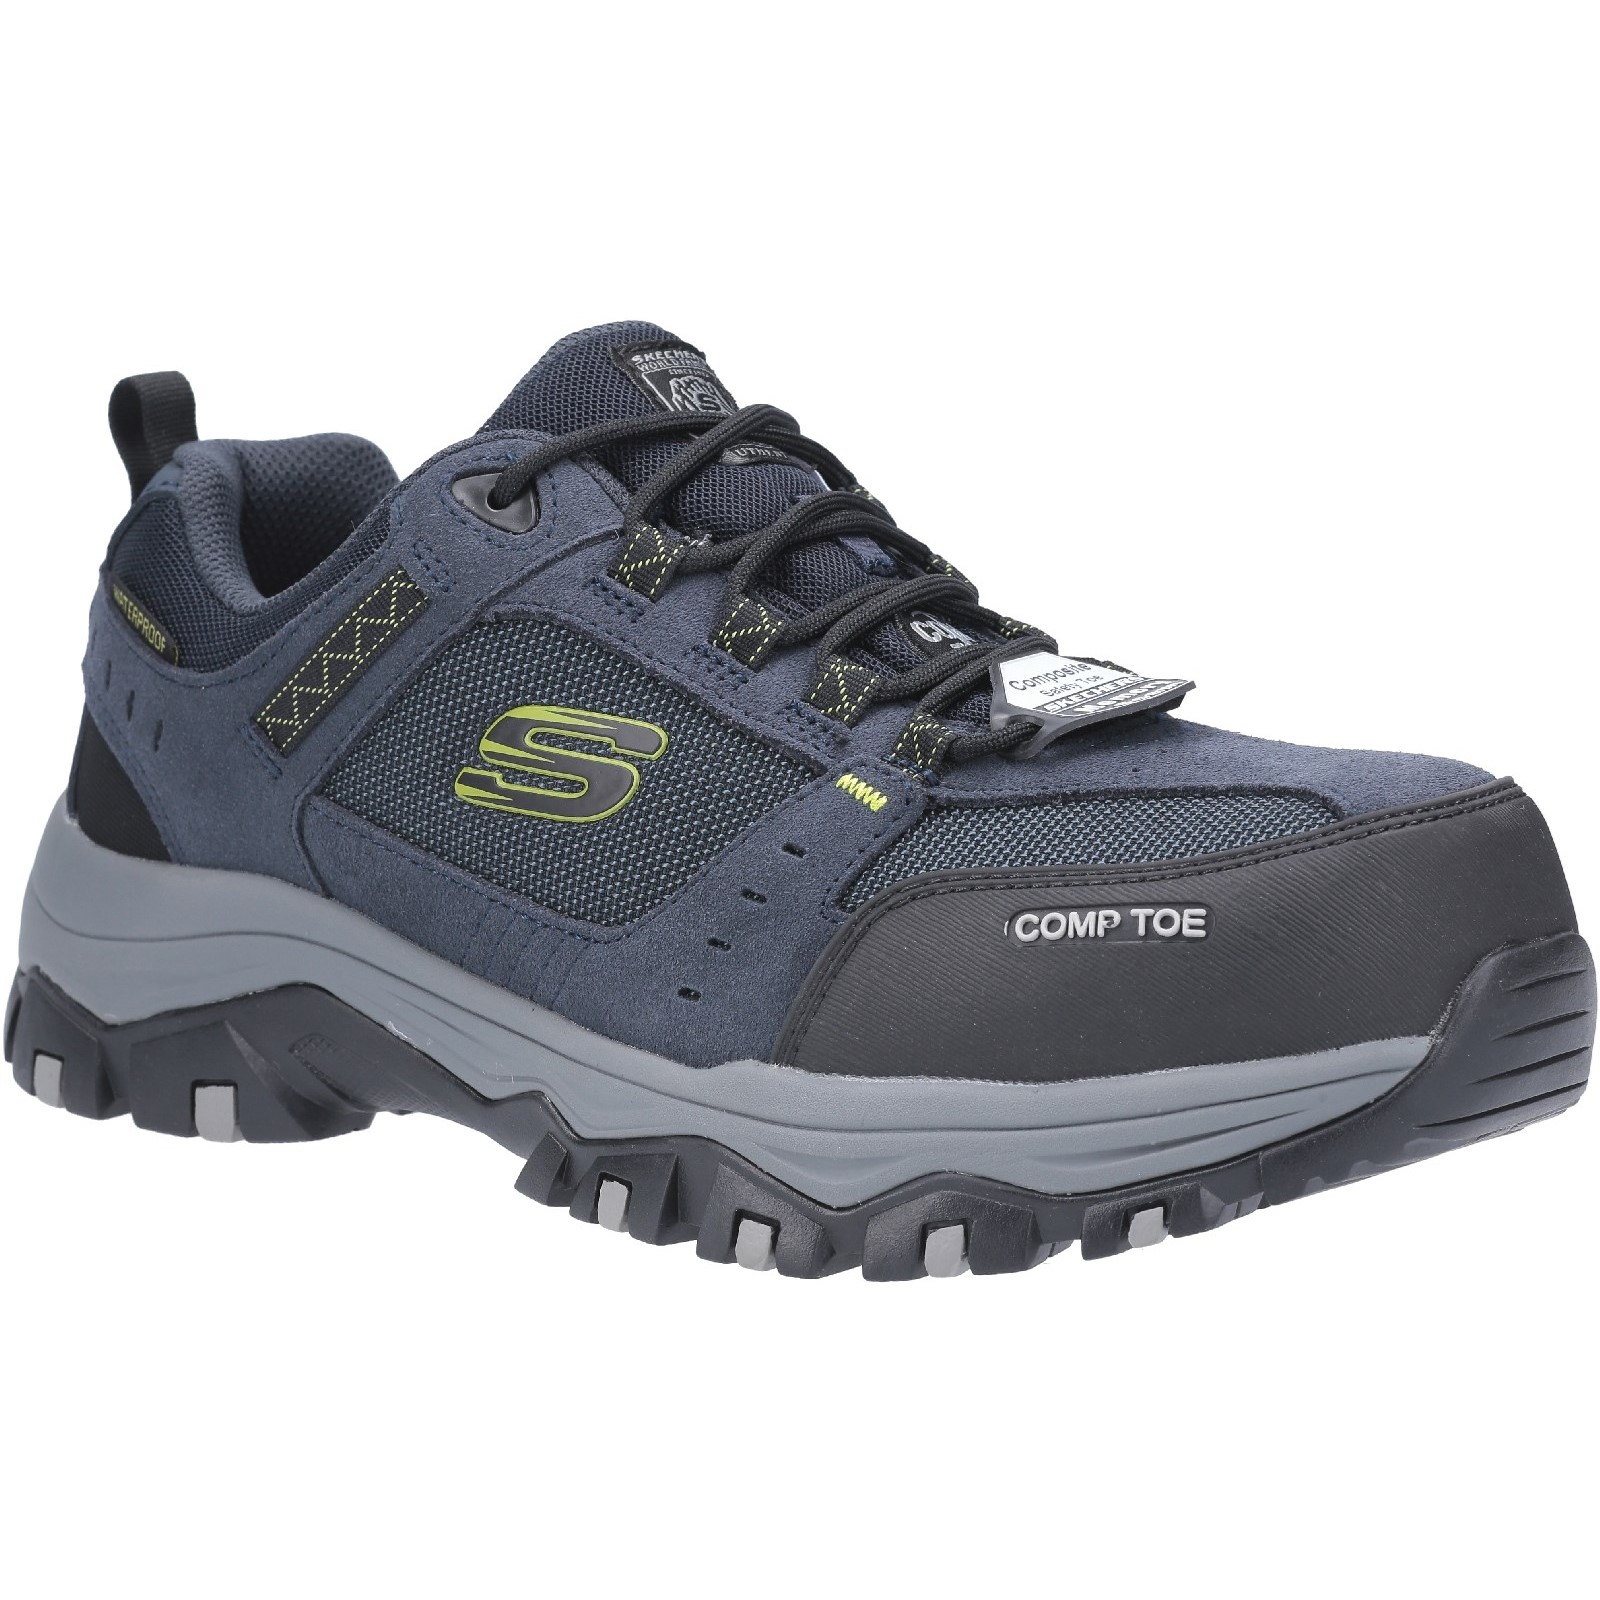 Greetah Lace Up Hiker with Composite Toe